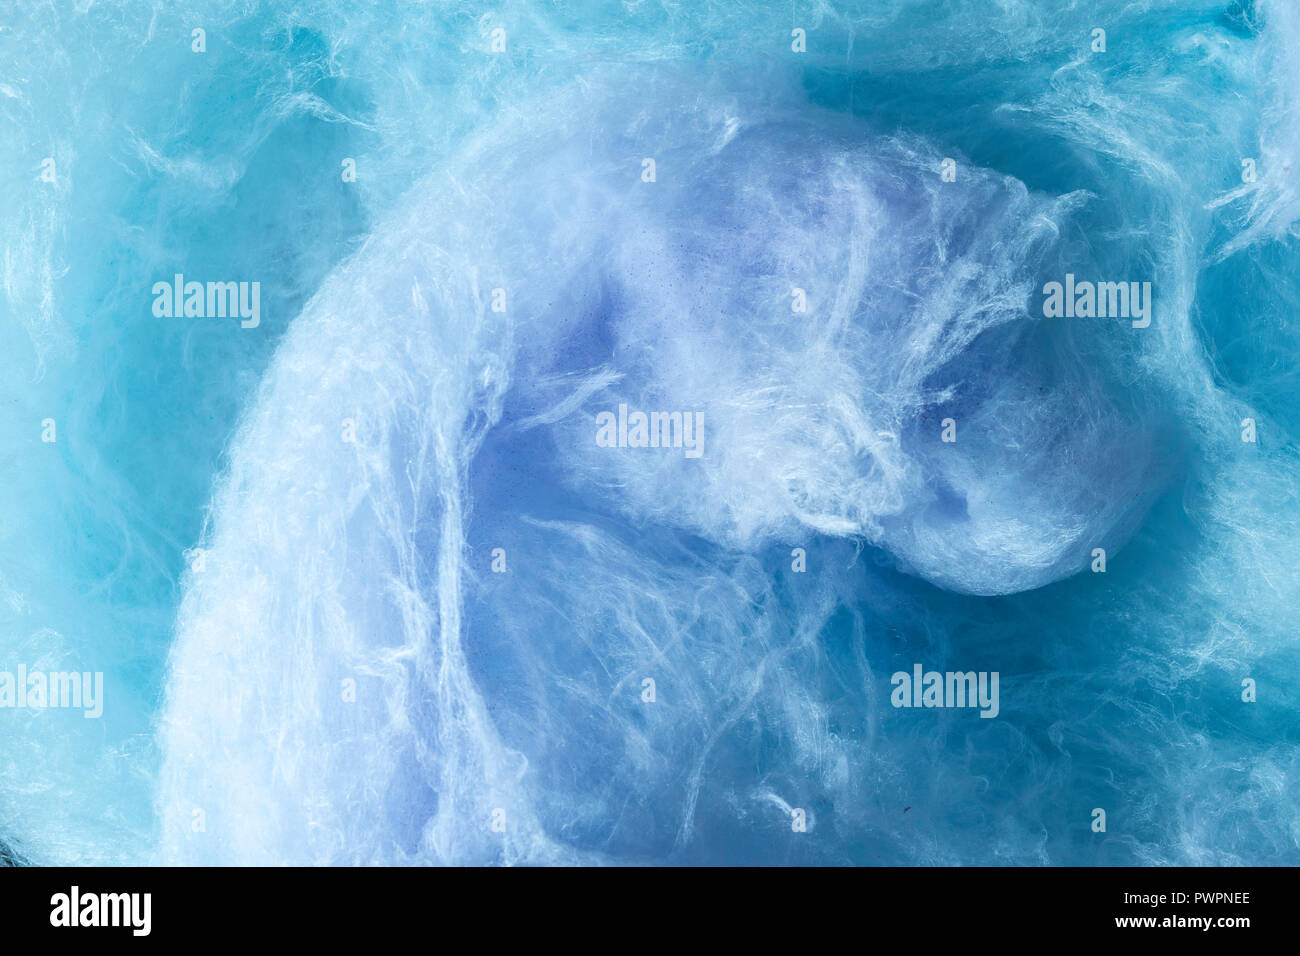 Giant swirl of purple and blue cotton candy filling frame. Stock Photo